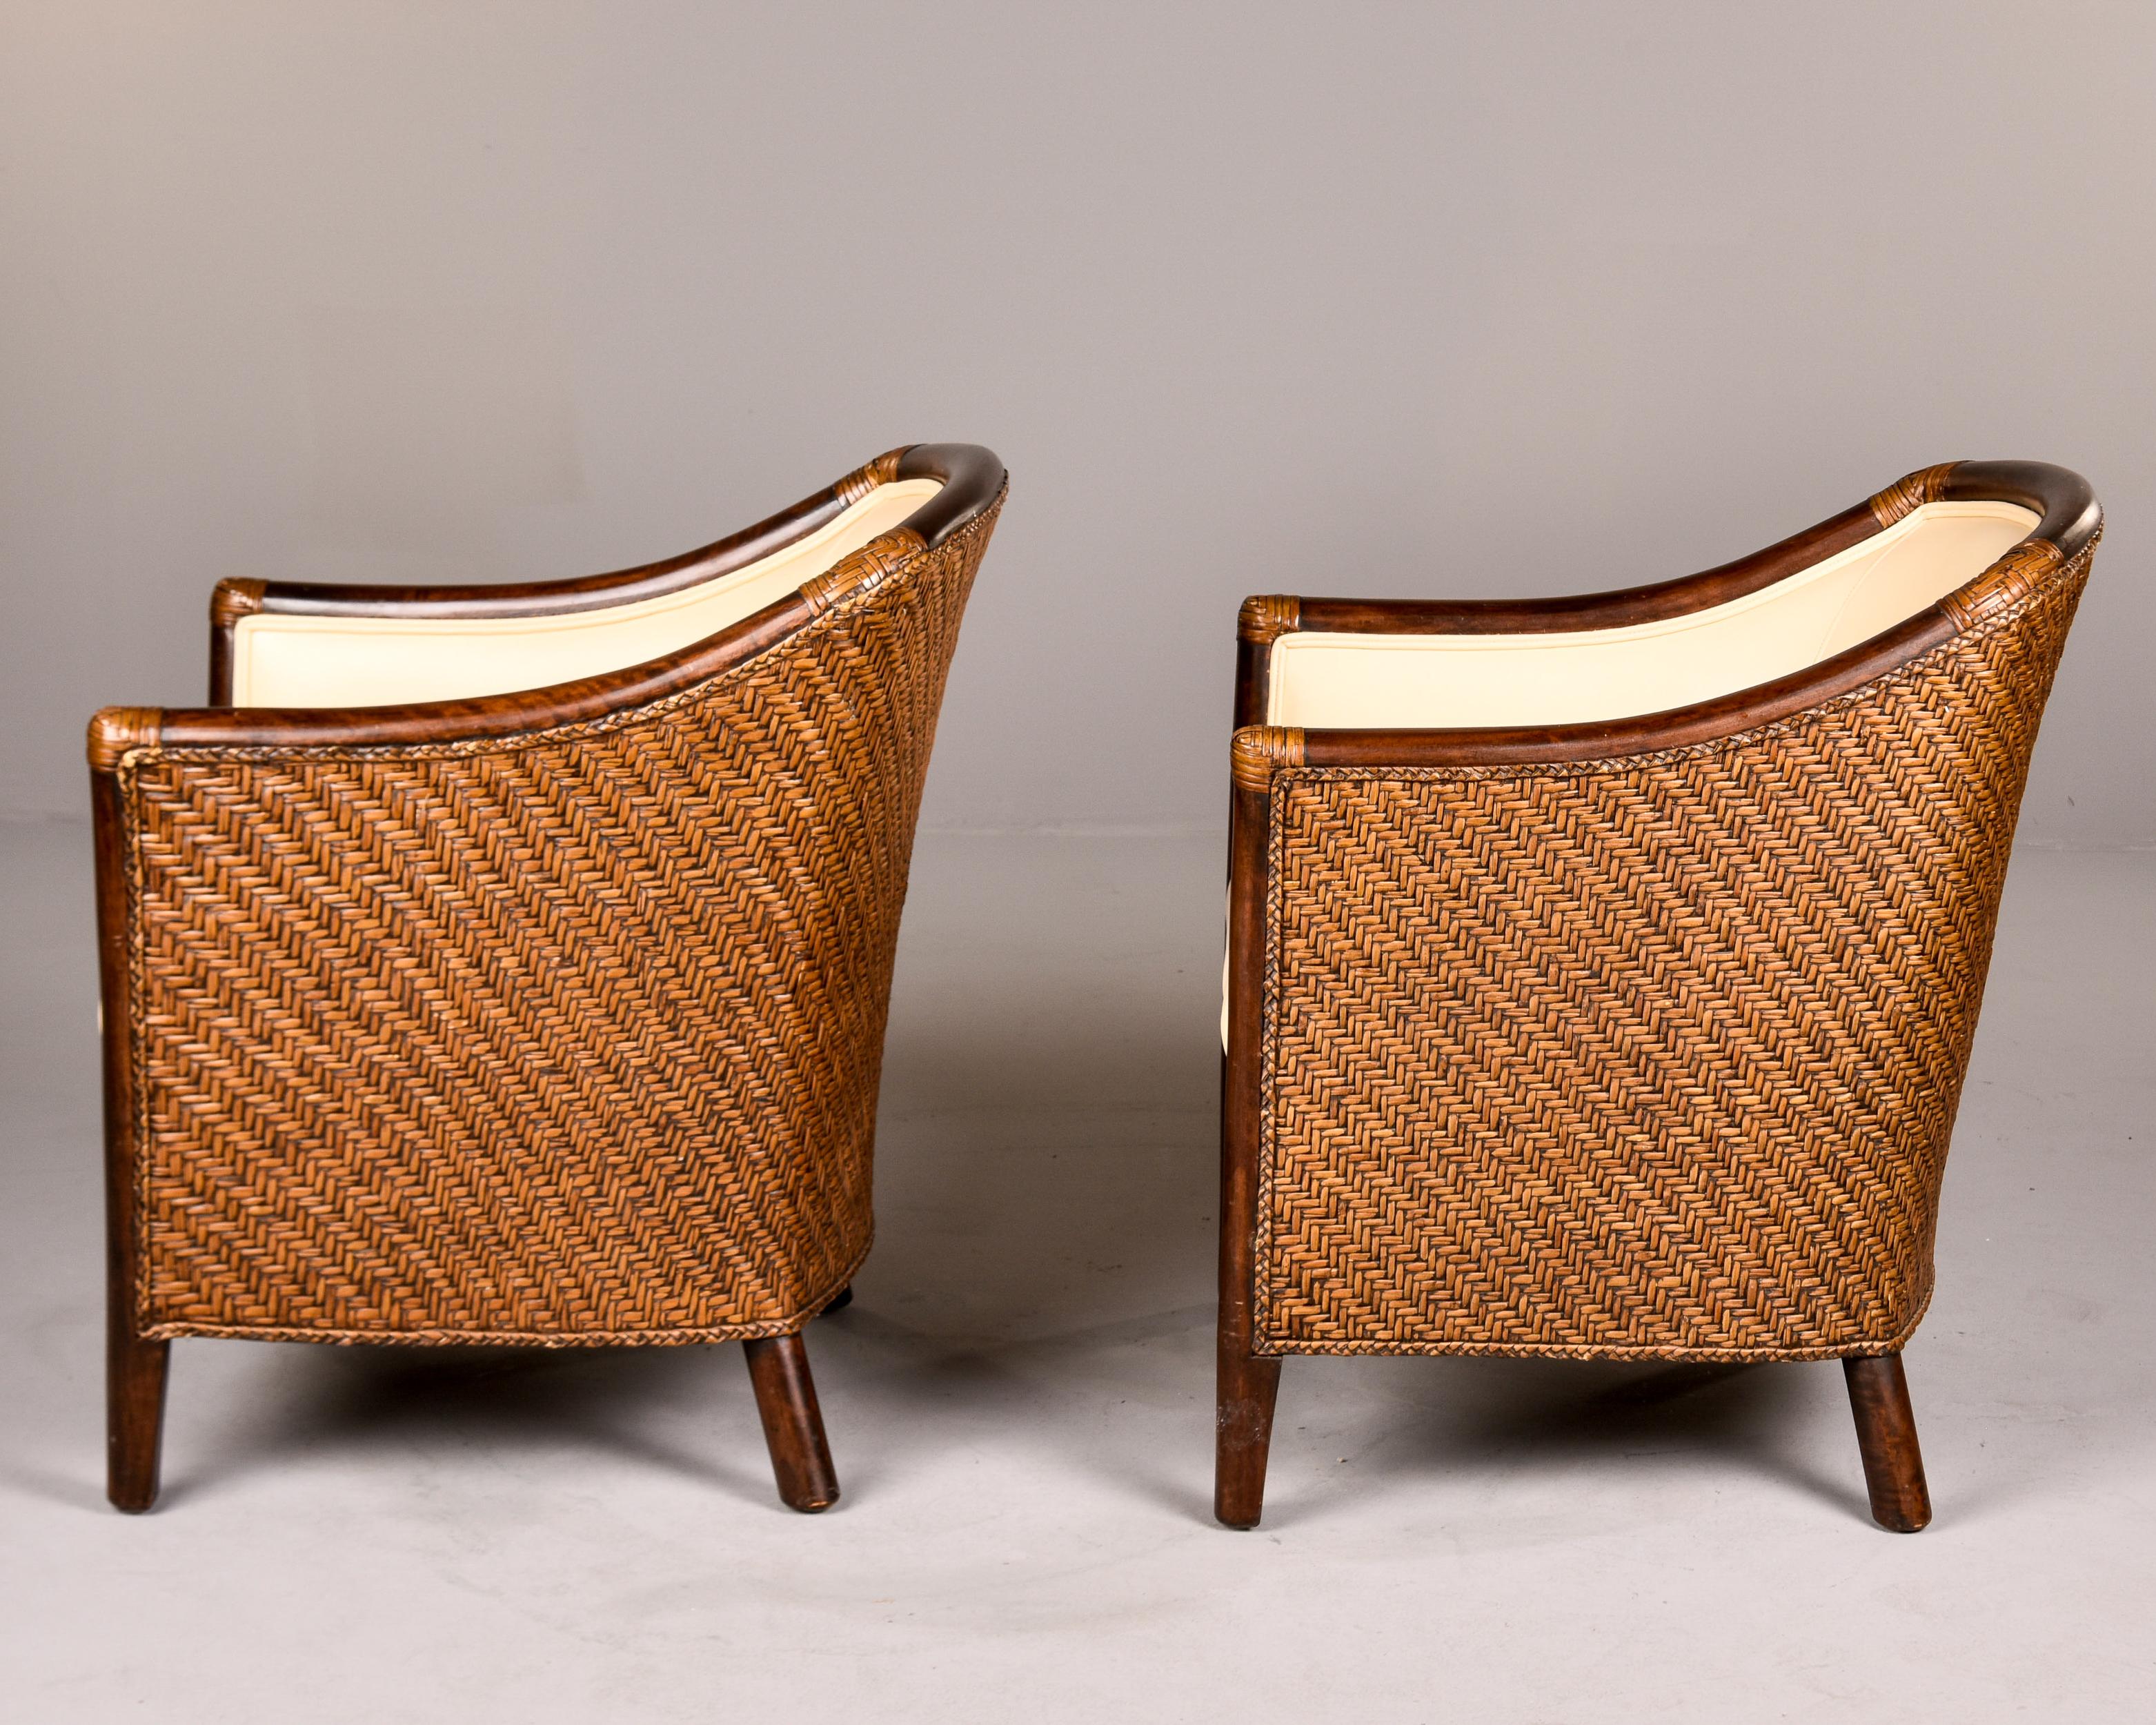 20th Century Pair Art Deco Wicker Club Chairs with New Leather Upholstery For Sale